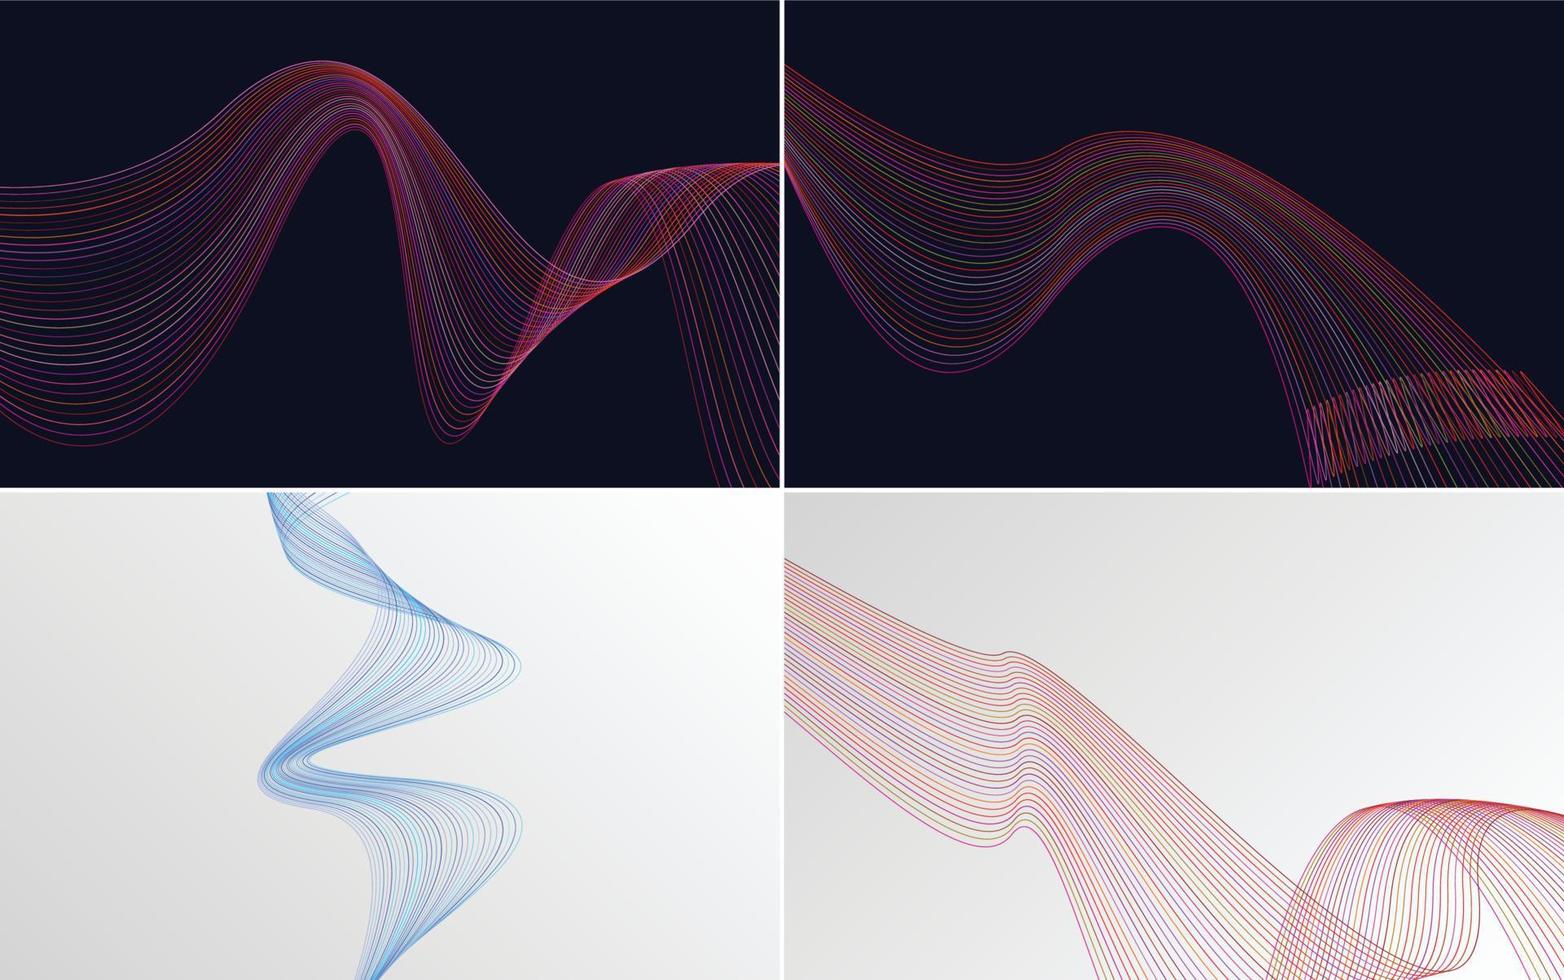 Enhance your presentations with this set of 4 vector backgrounds